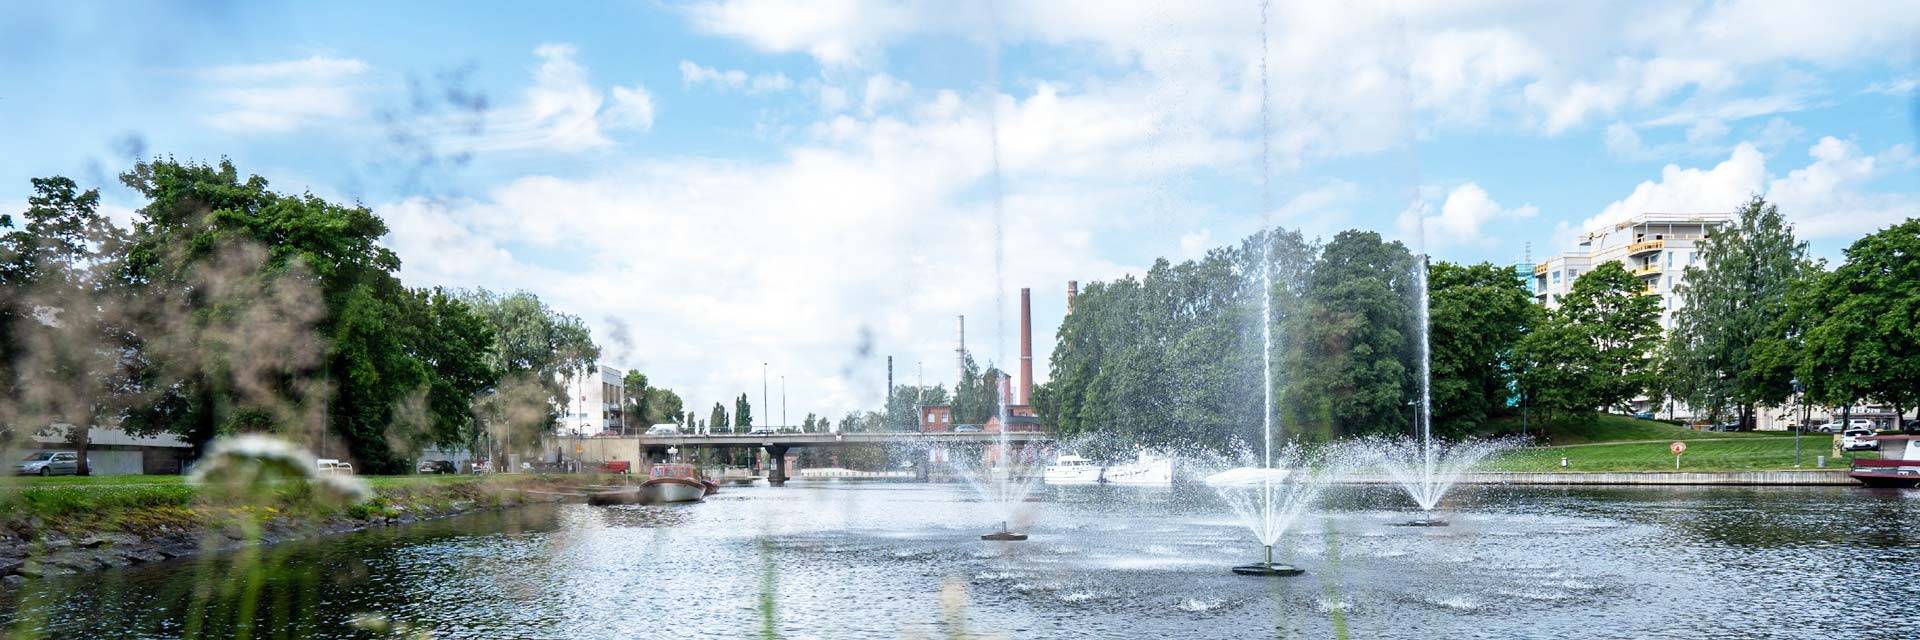 Water fountains at the cemter of Valkeakoski city